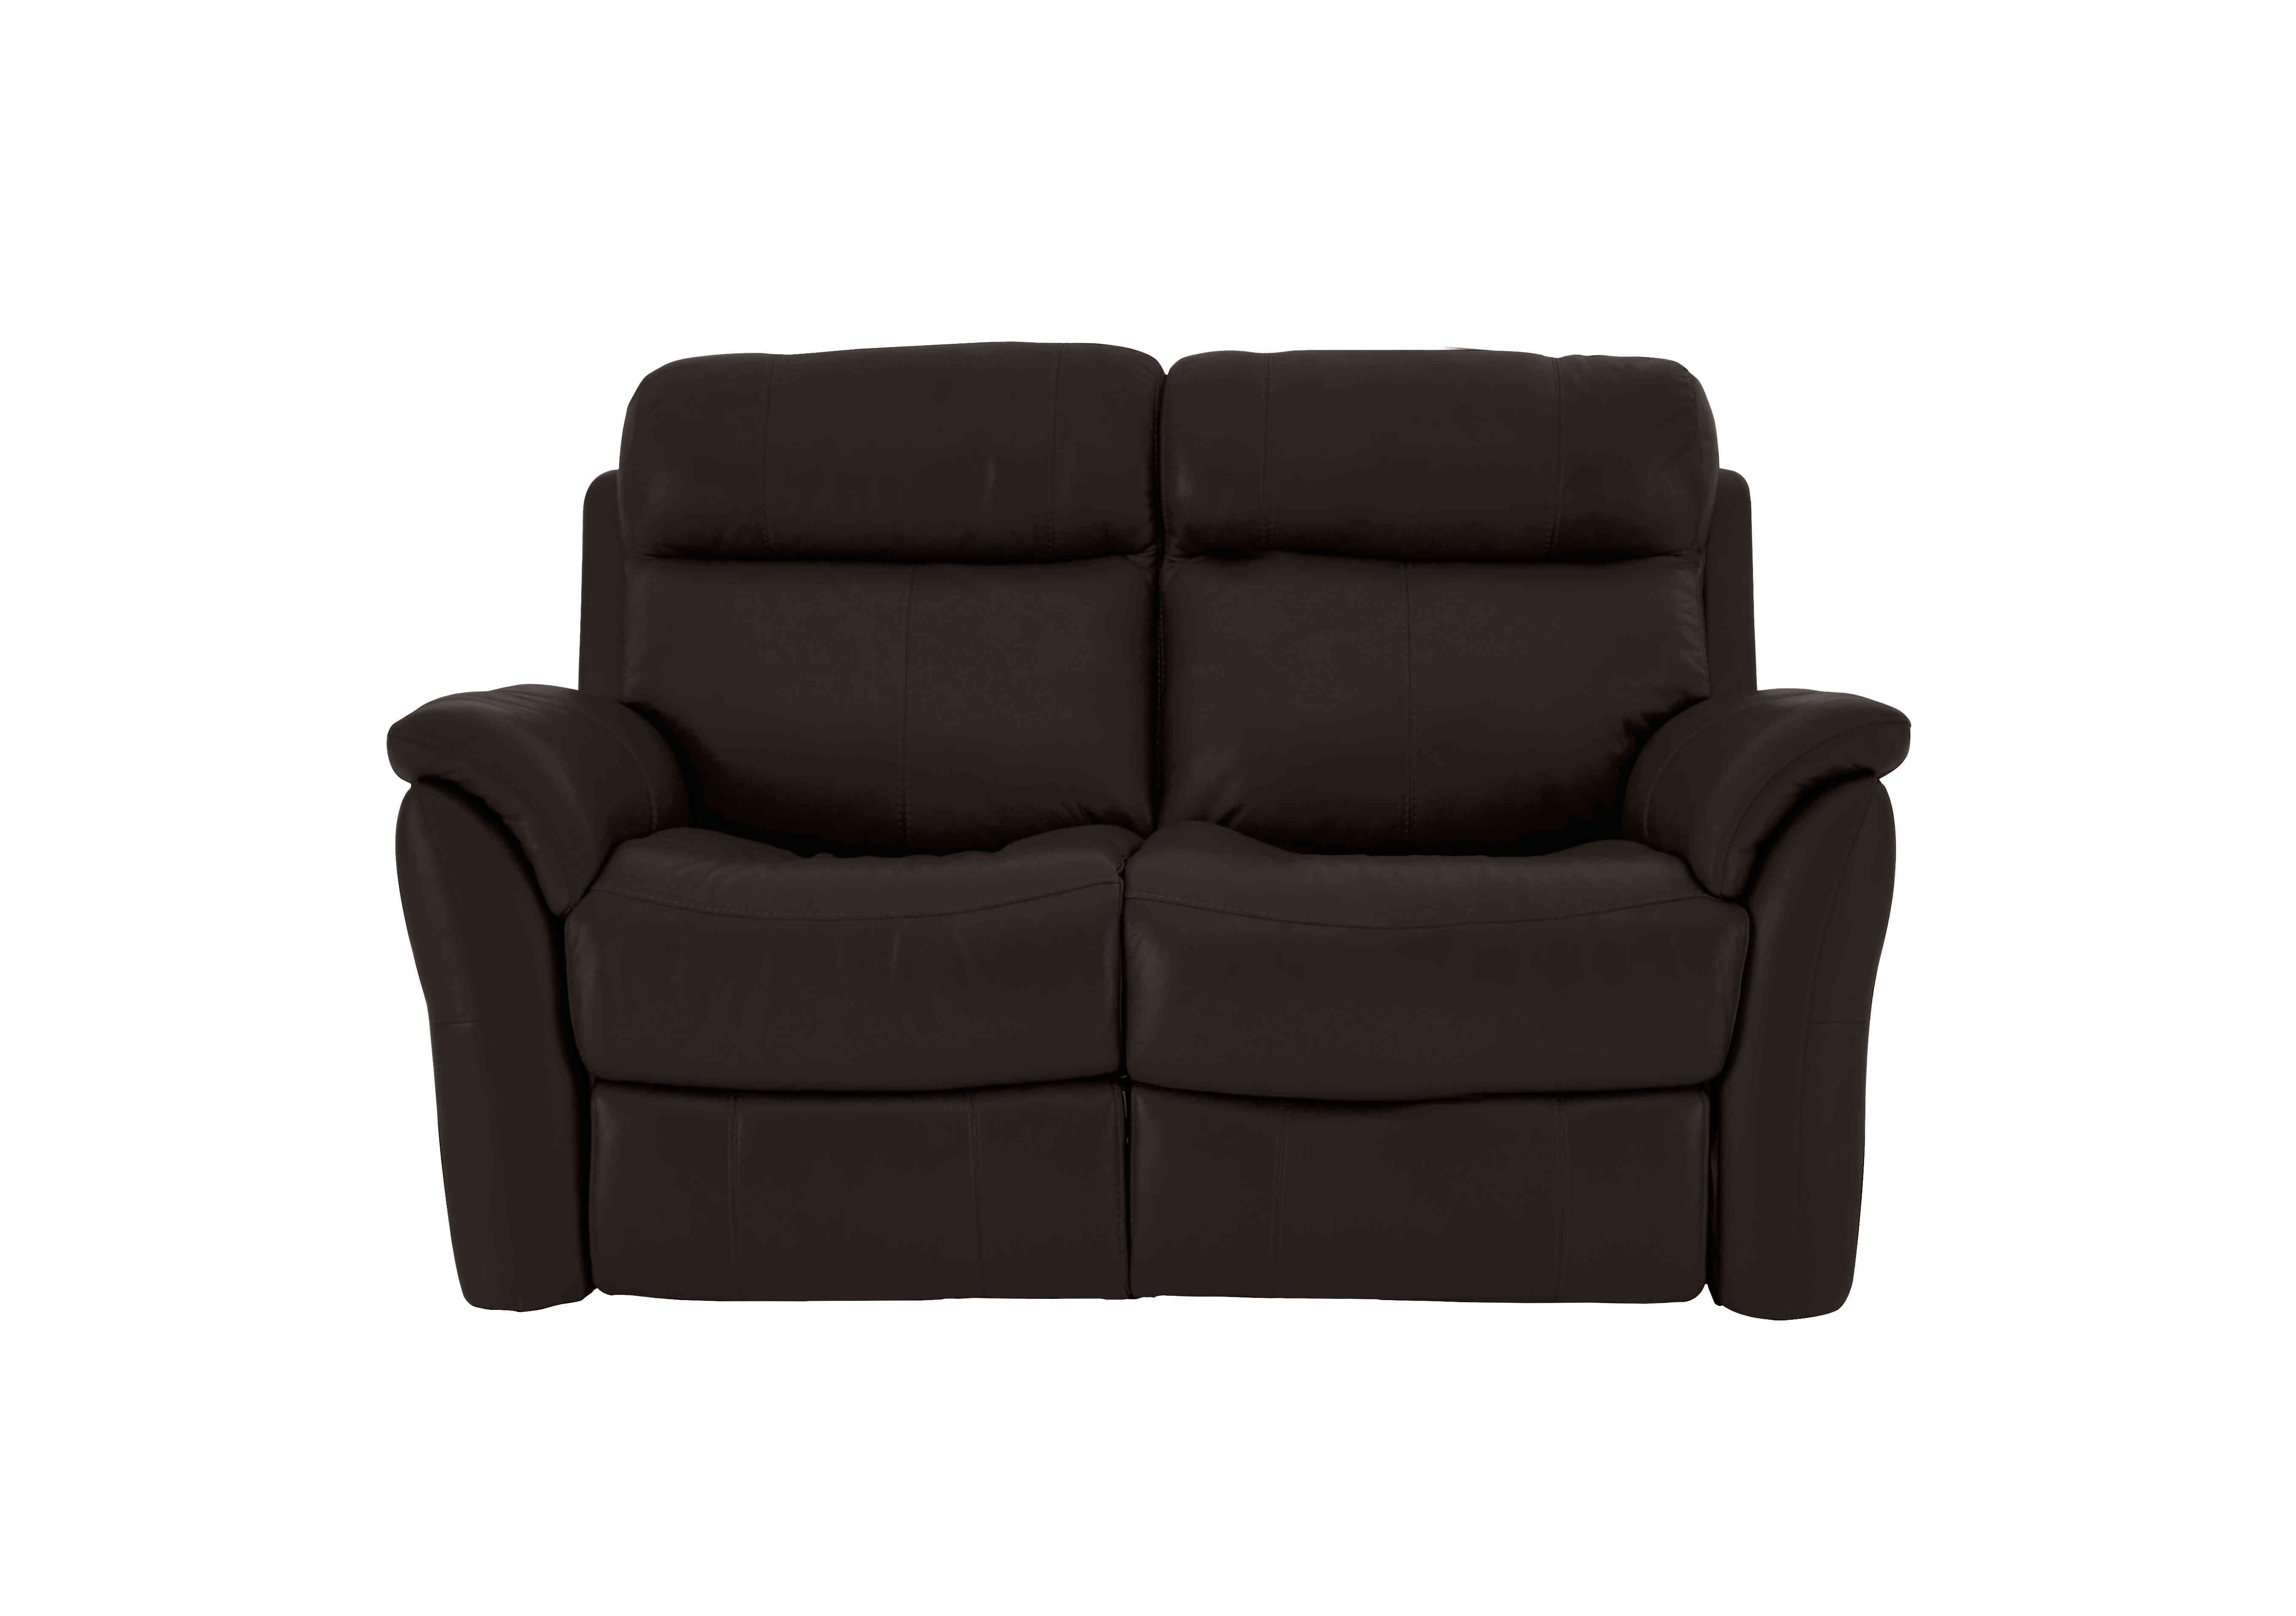 Relax Station Revive 2 Seater Leather Sofa in Bv-1748 Dark Chocolate on Furniture Village